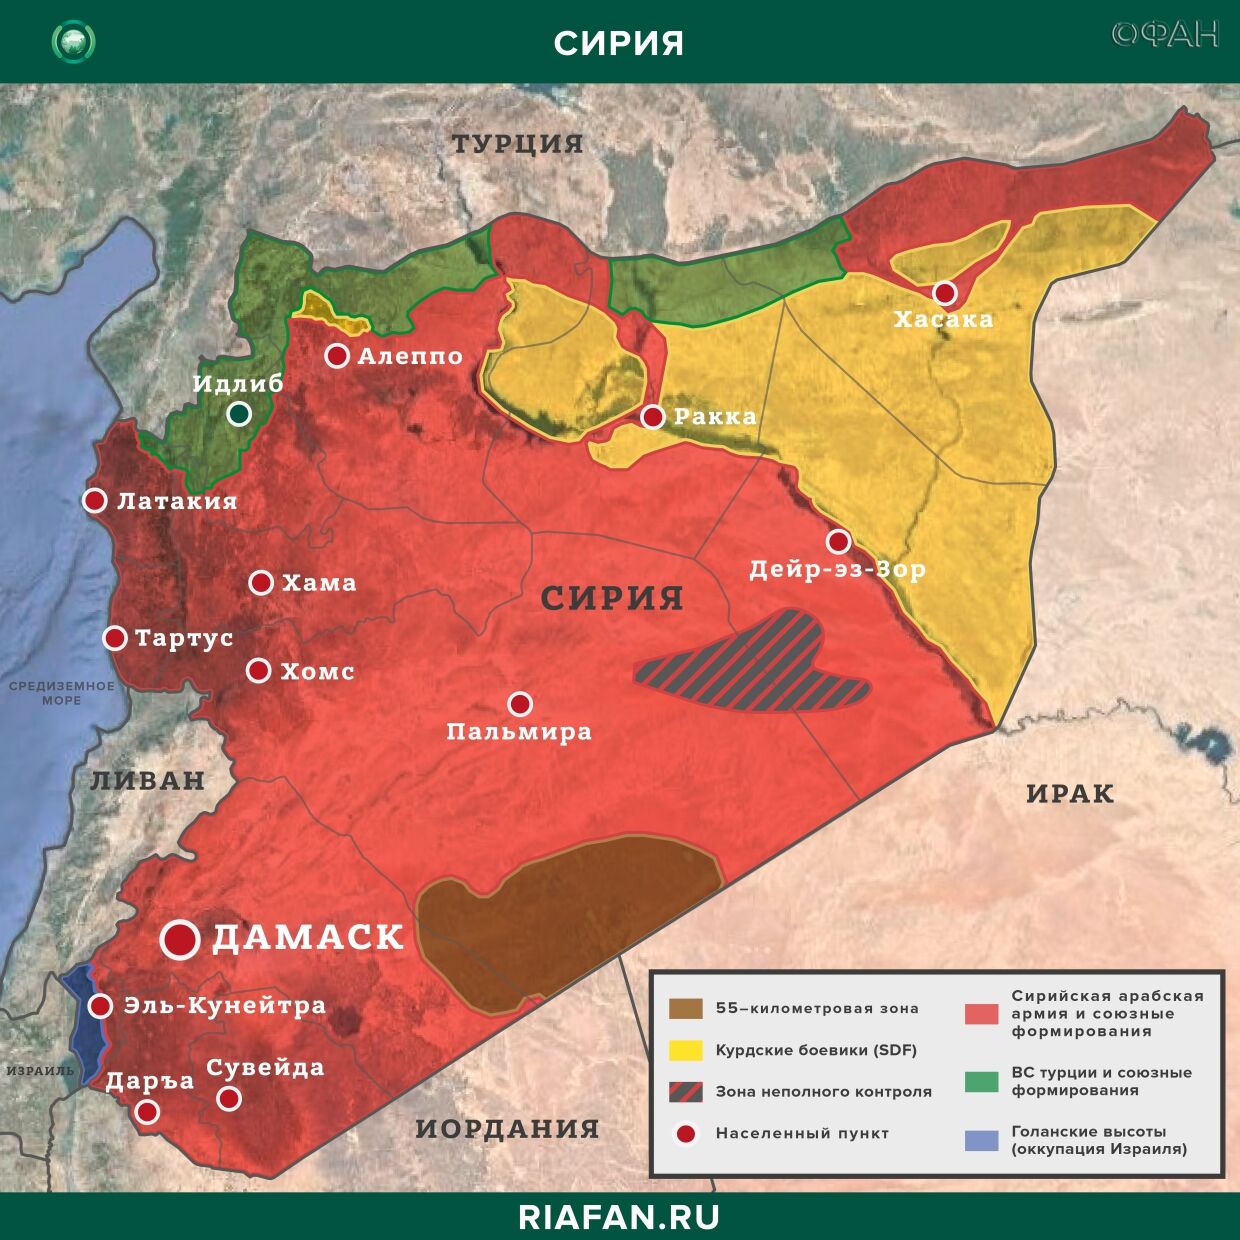 Syria the results of the day on 22 April 06.00: Israel tried to hit Homs, HTSH obstructs patrolling of Turkey and the Russian Federation in Idlib